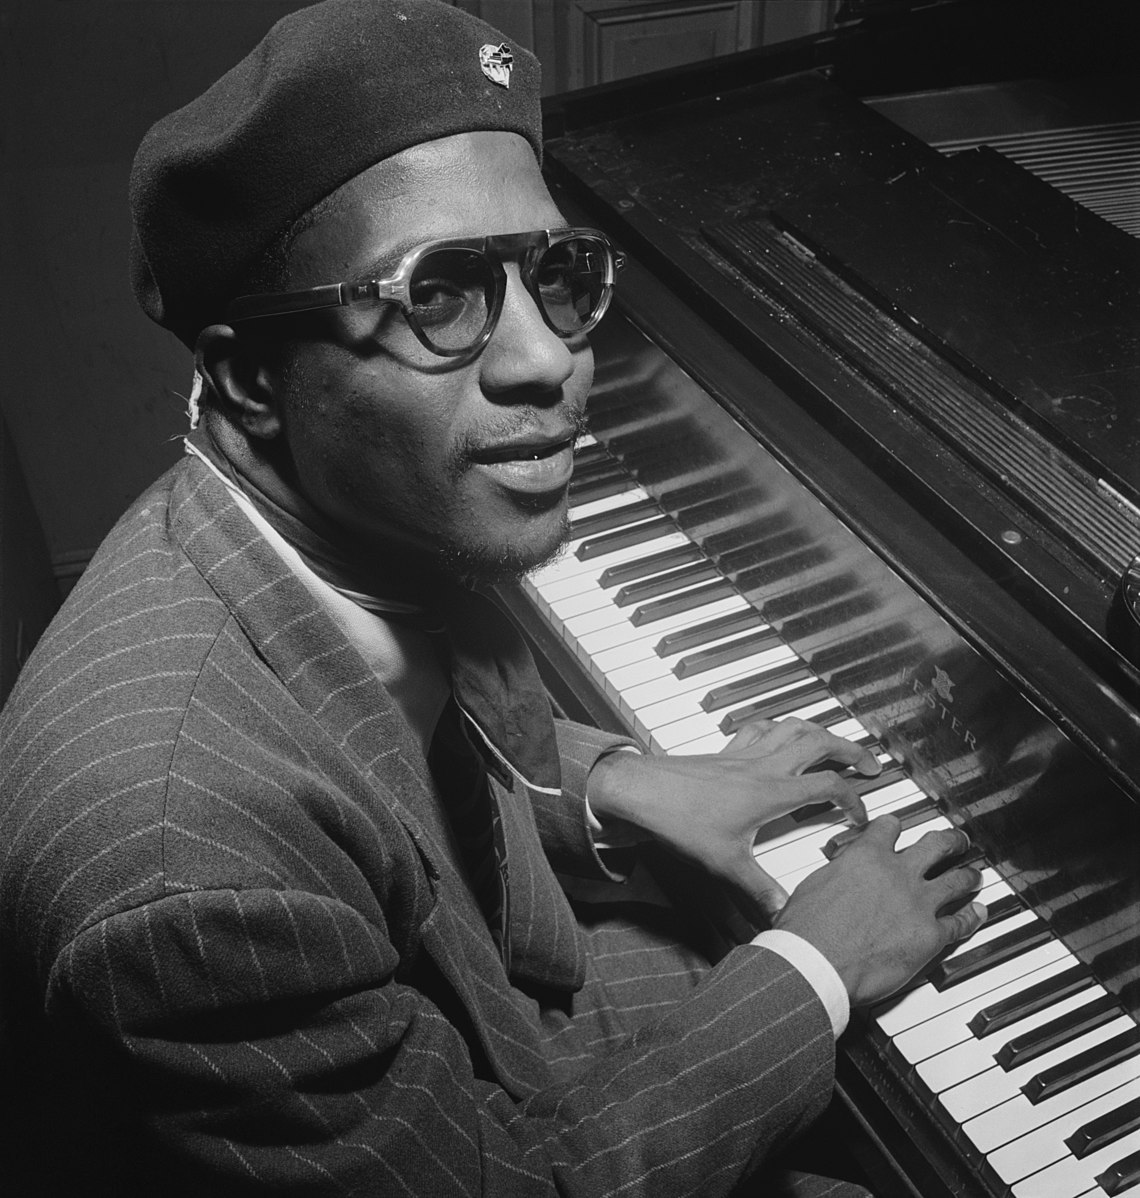 Thelonious Monk - The Complete Albums Collection: 1957-1961